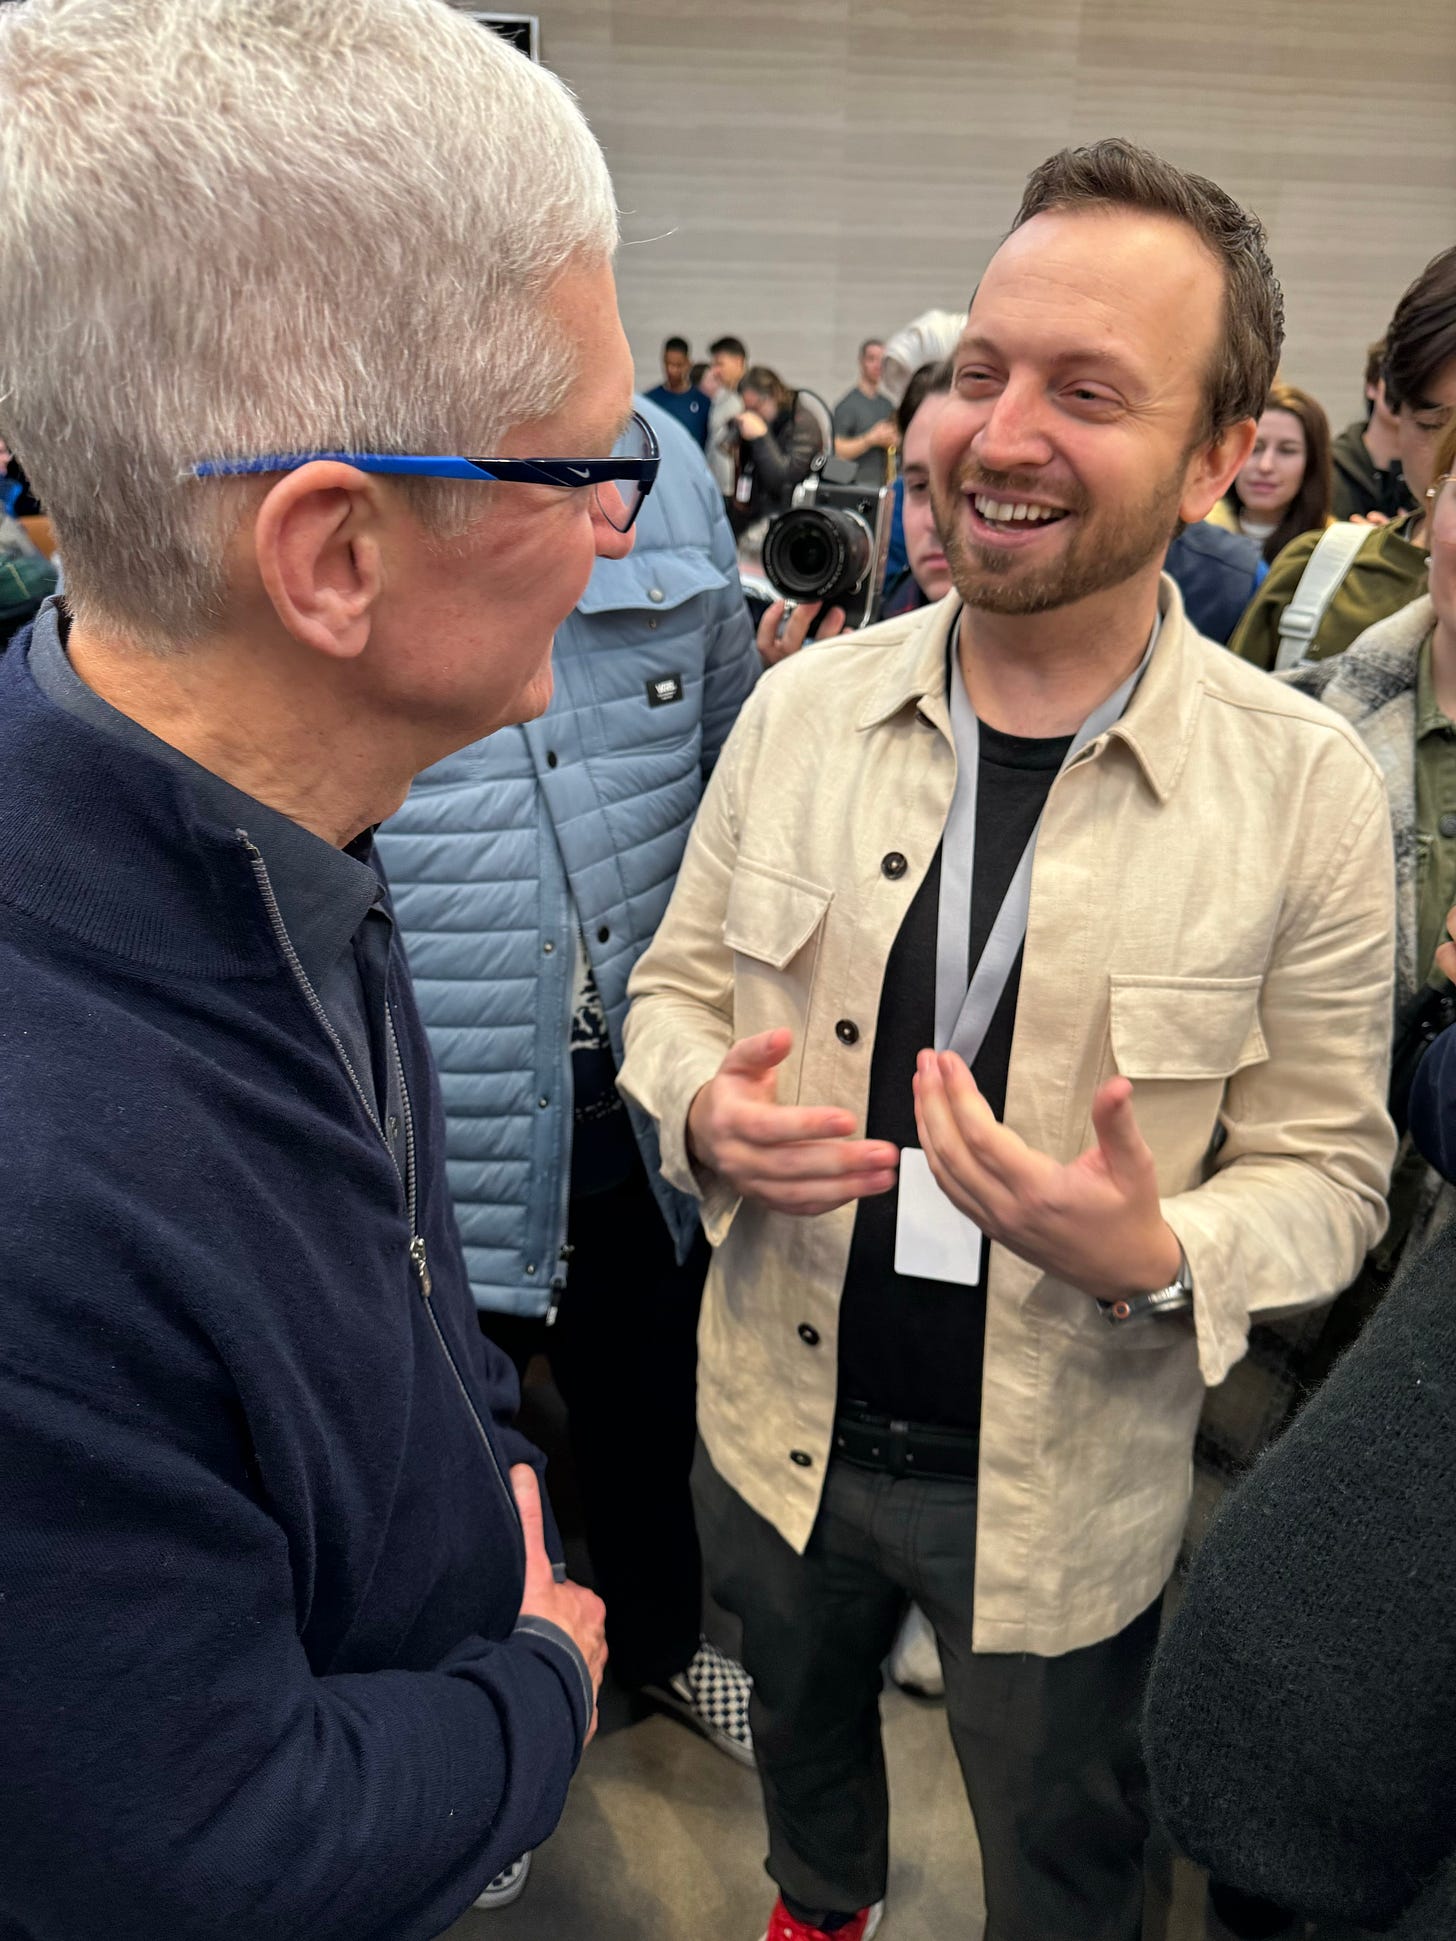 Tim Cook and Matt Swider at the Apple Store for the Vision Pro launch